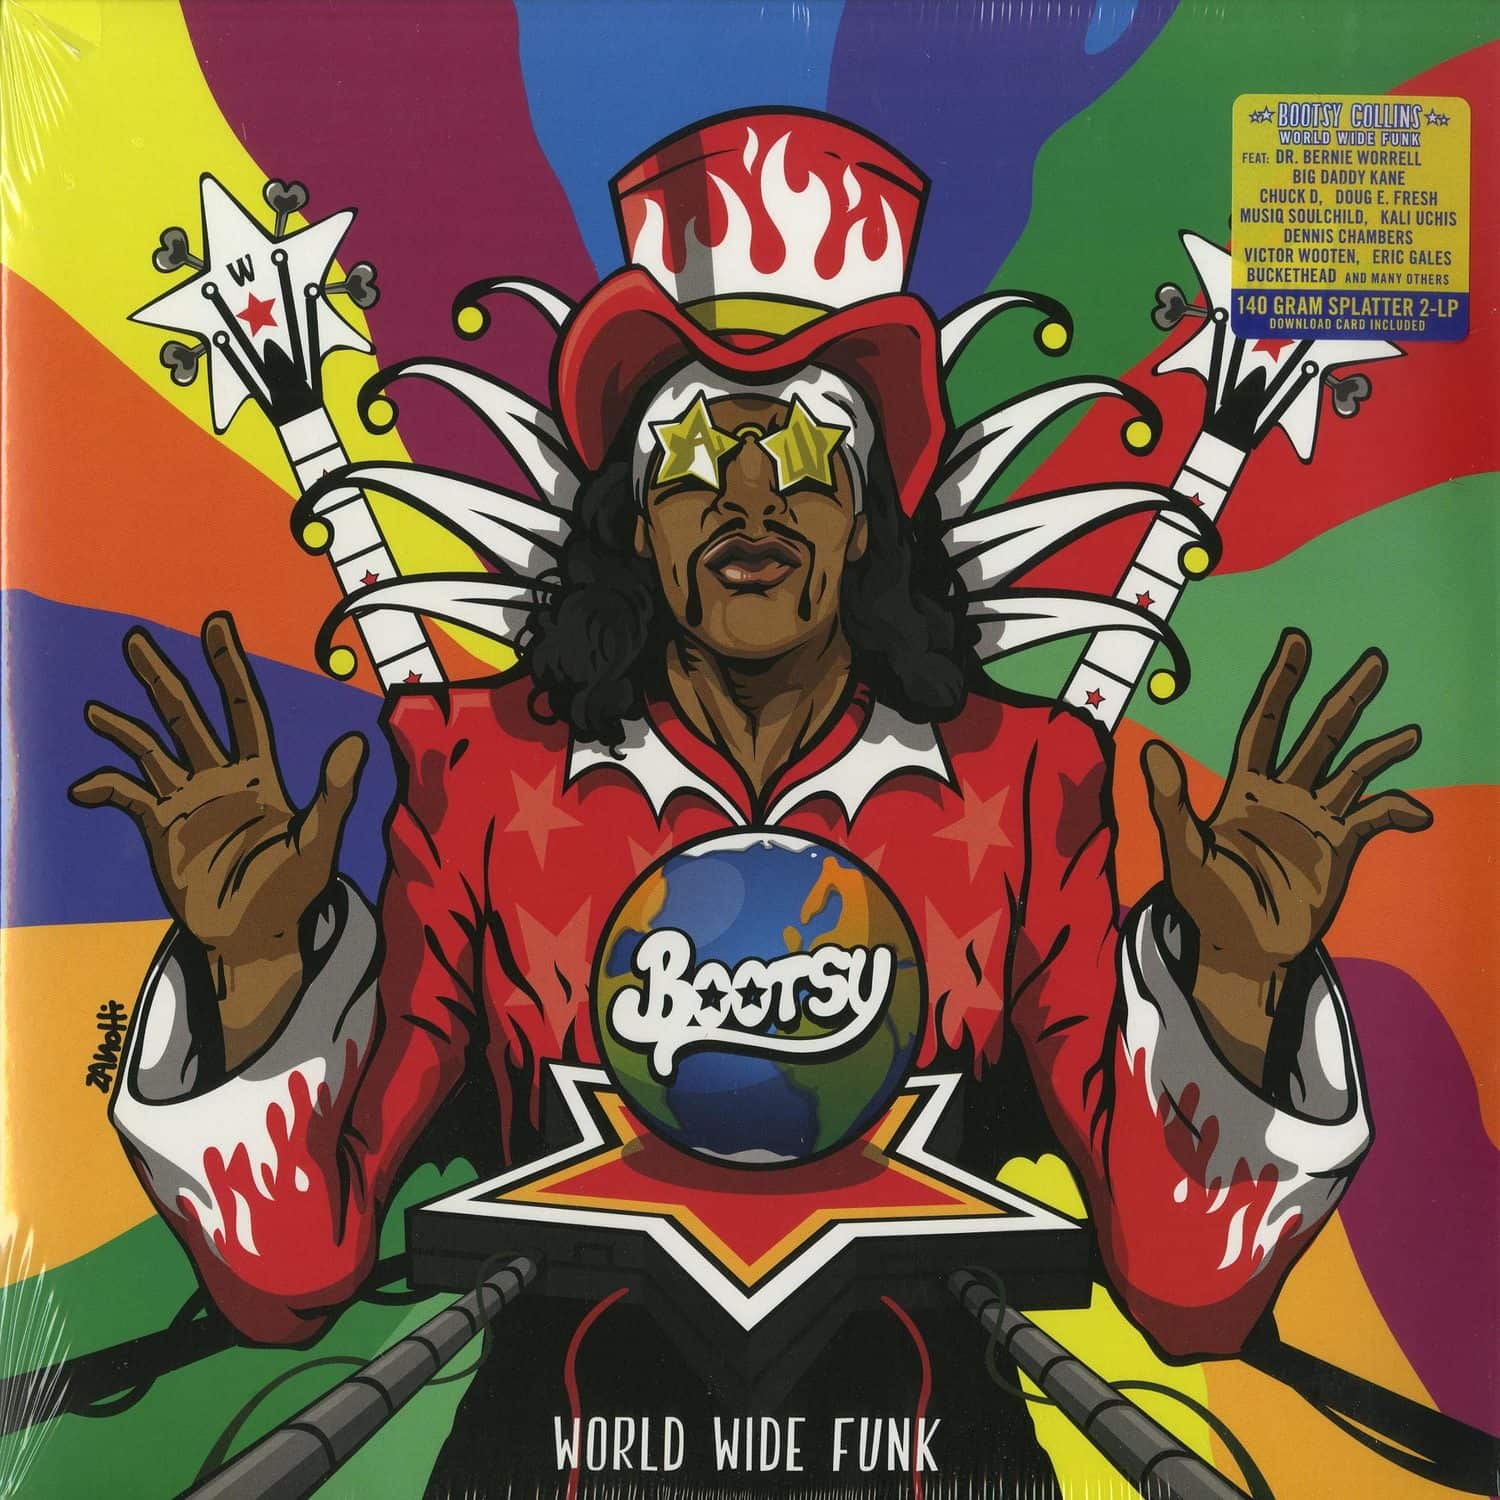 Bootsy Collins - WORLD WIDE FUNK 